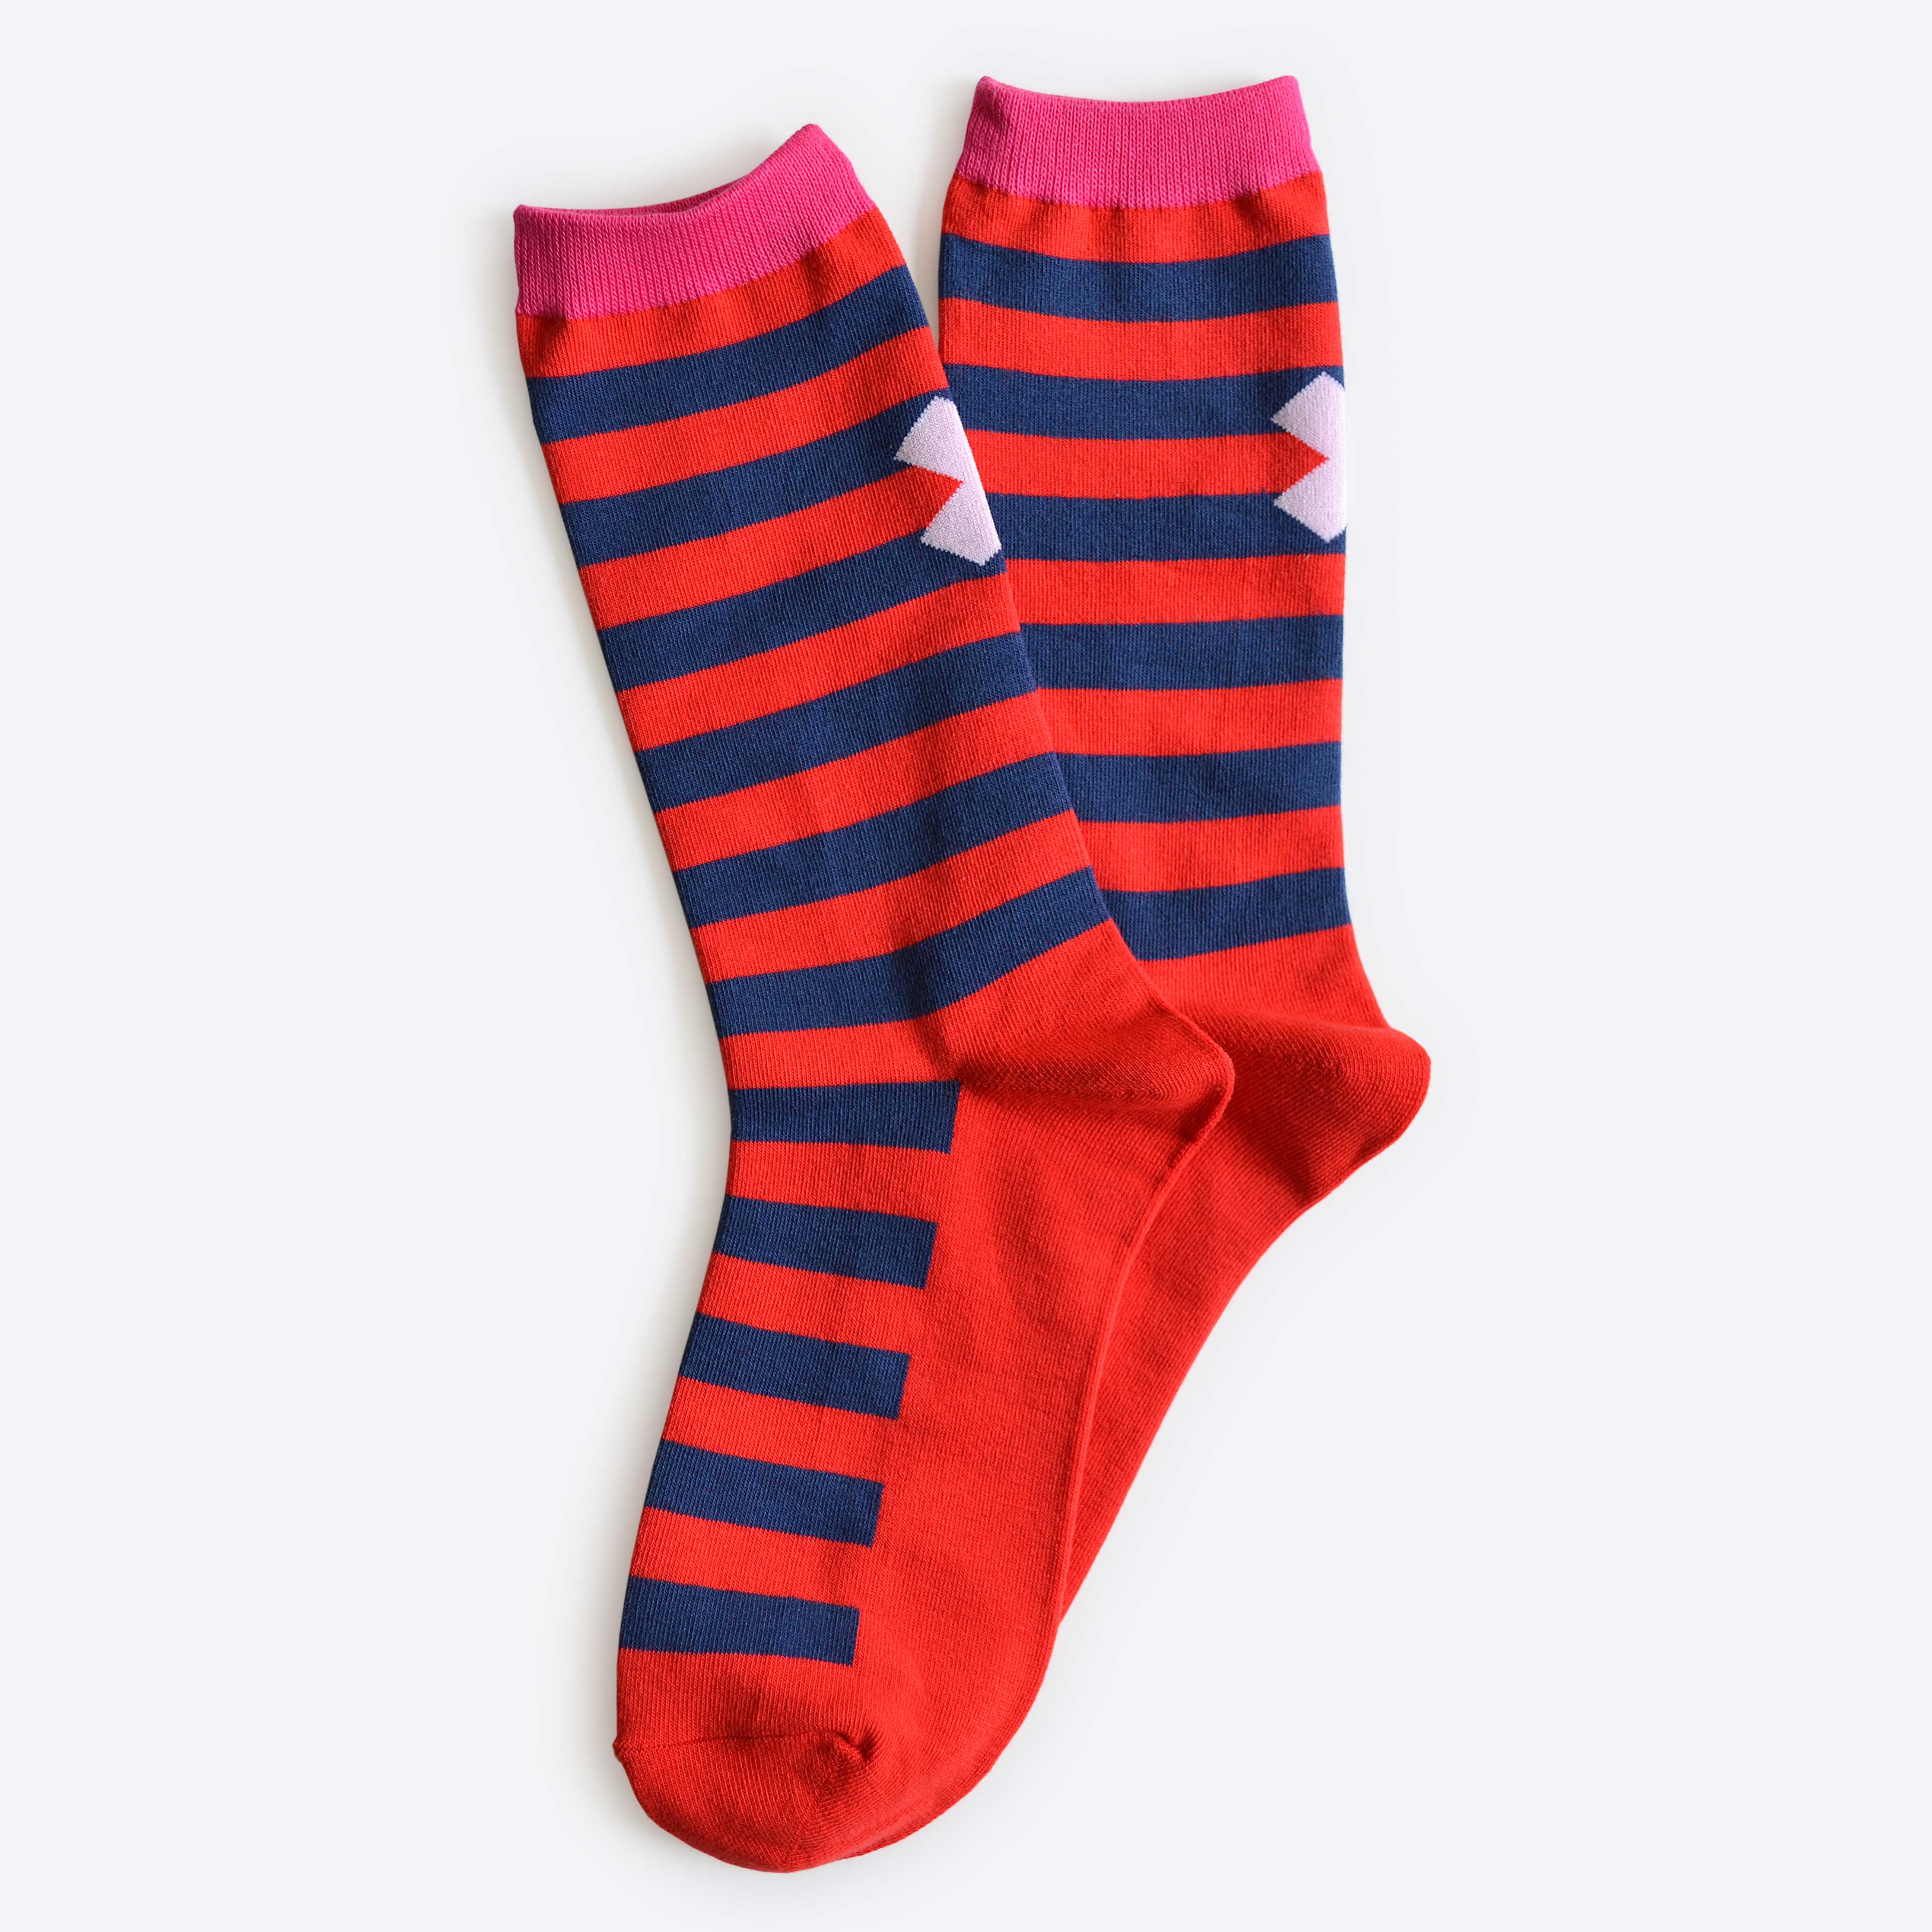 Hooray Sock Co. Taylor Red and Blue Stripe Crew Socks. Bold graphic &#39;X&#39; on back. Crew length, 80% cotton, 20% spandex. Sizes: Large (US men’s 8-12), Small (US women&#39;s 4-10). 